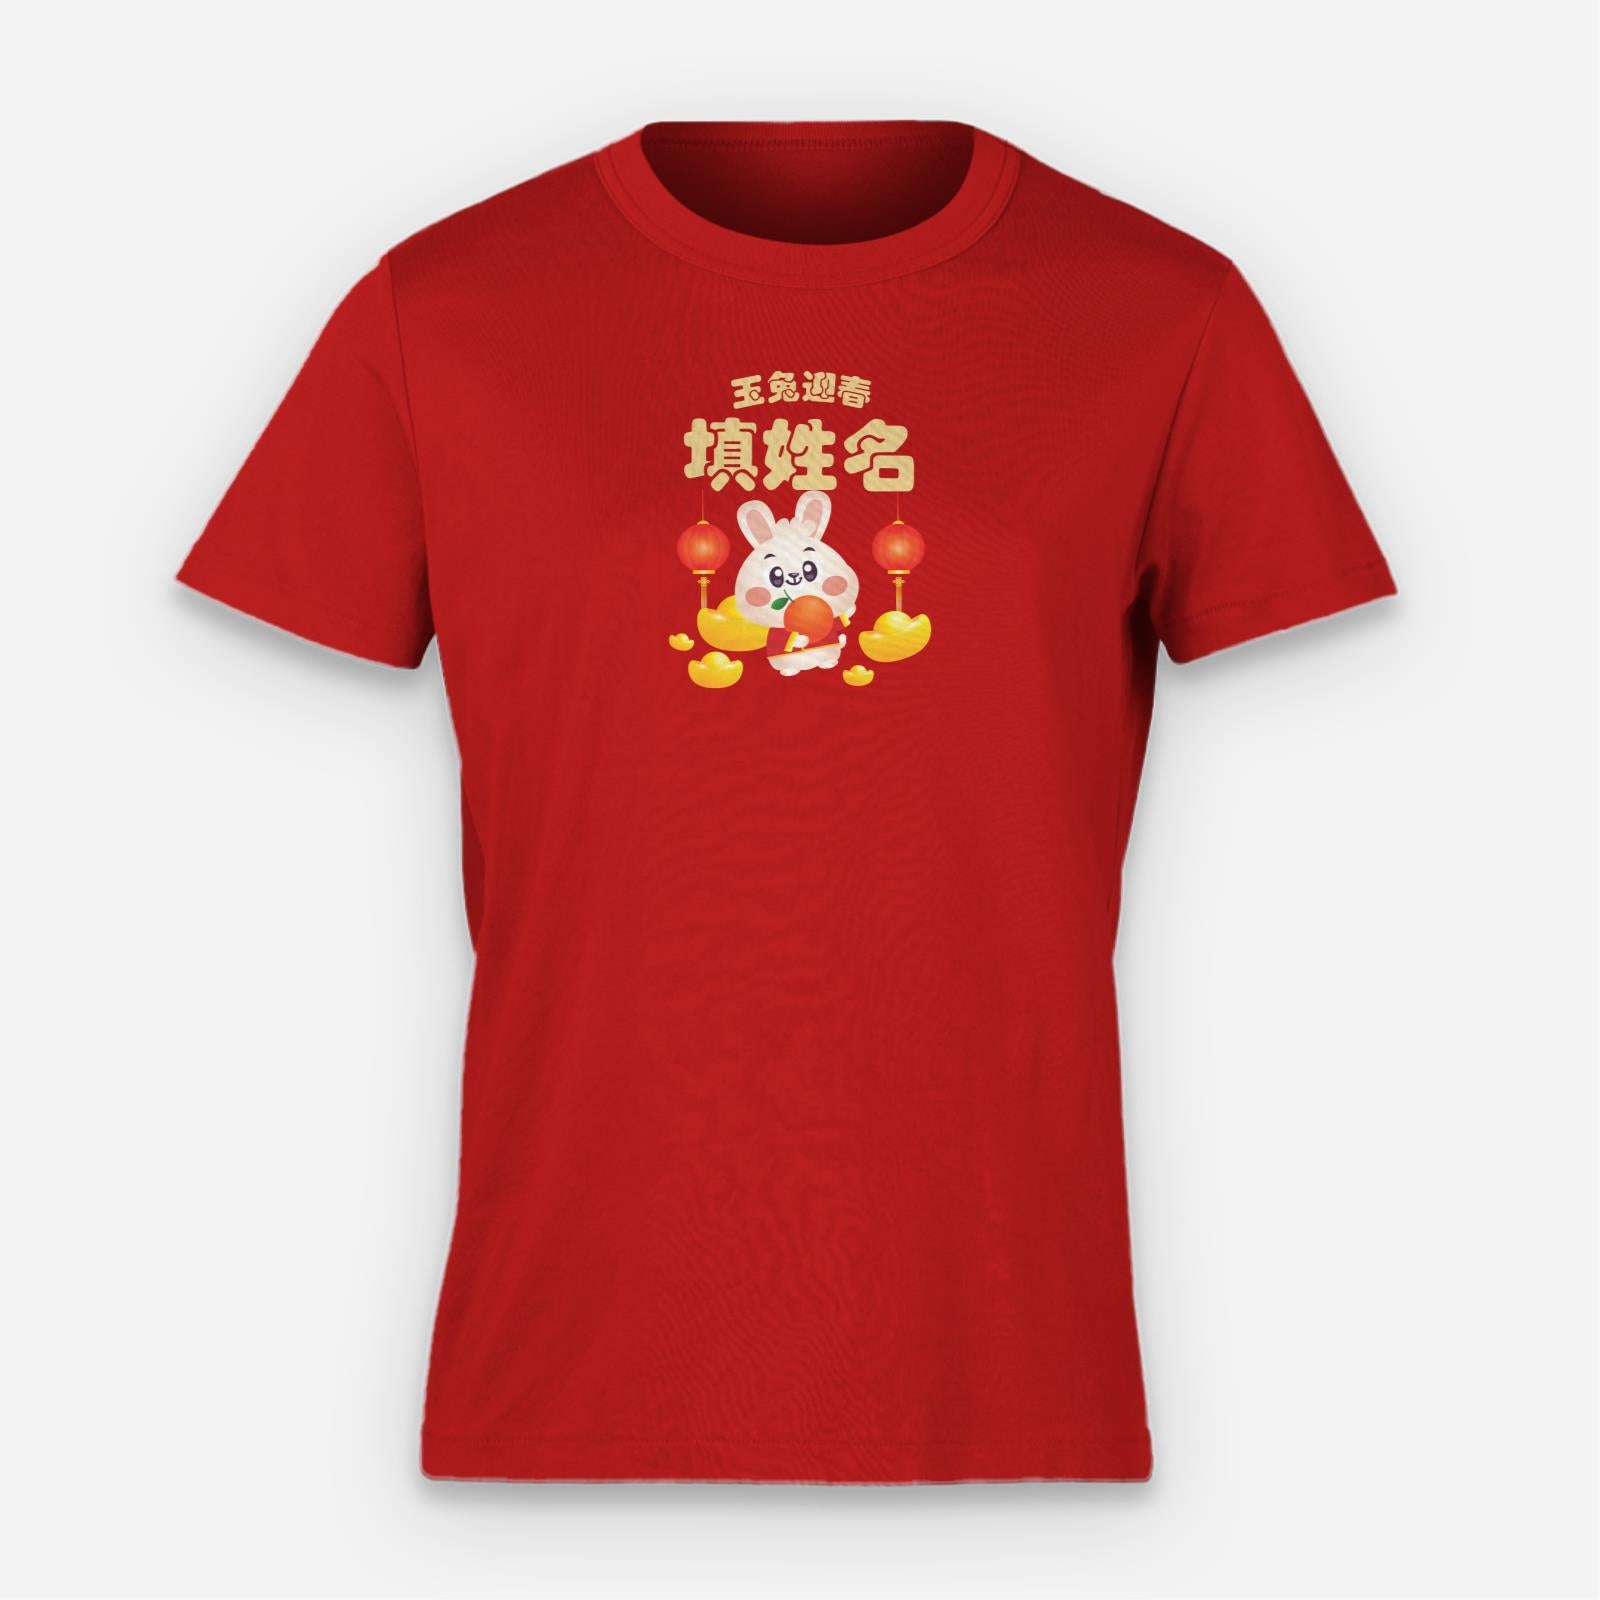 Cny Rabbit Family - Brother Rabbit Slim Fit Women Tee Shirt with Chinese Personalization